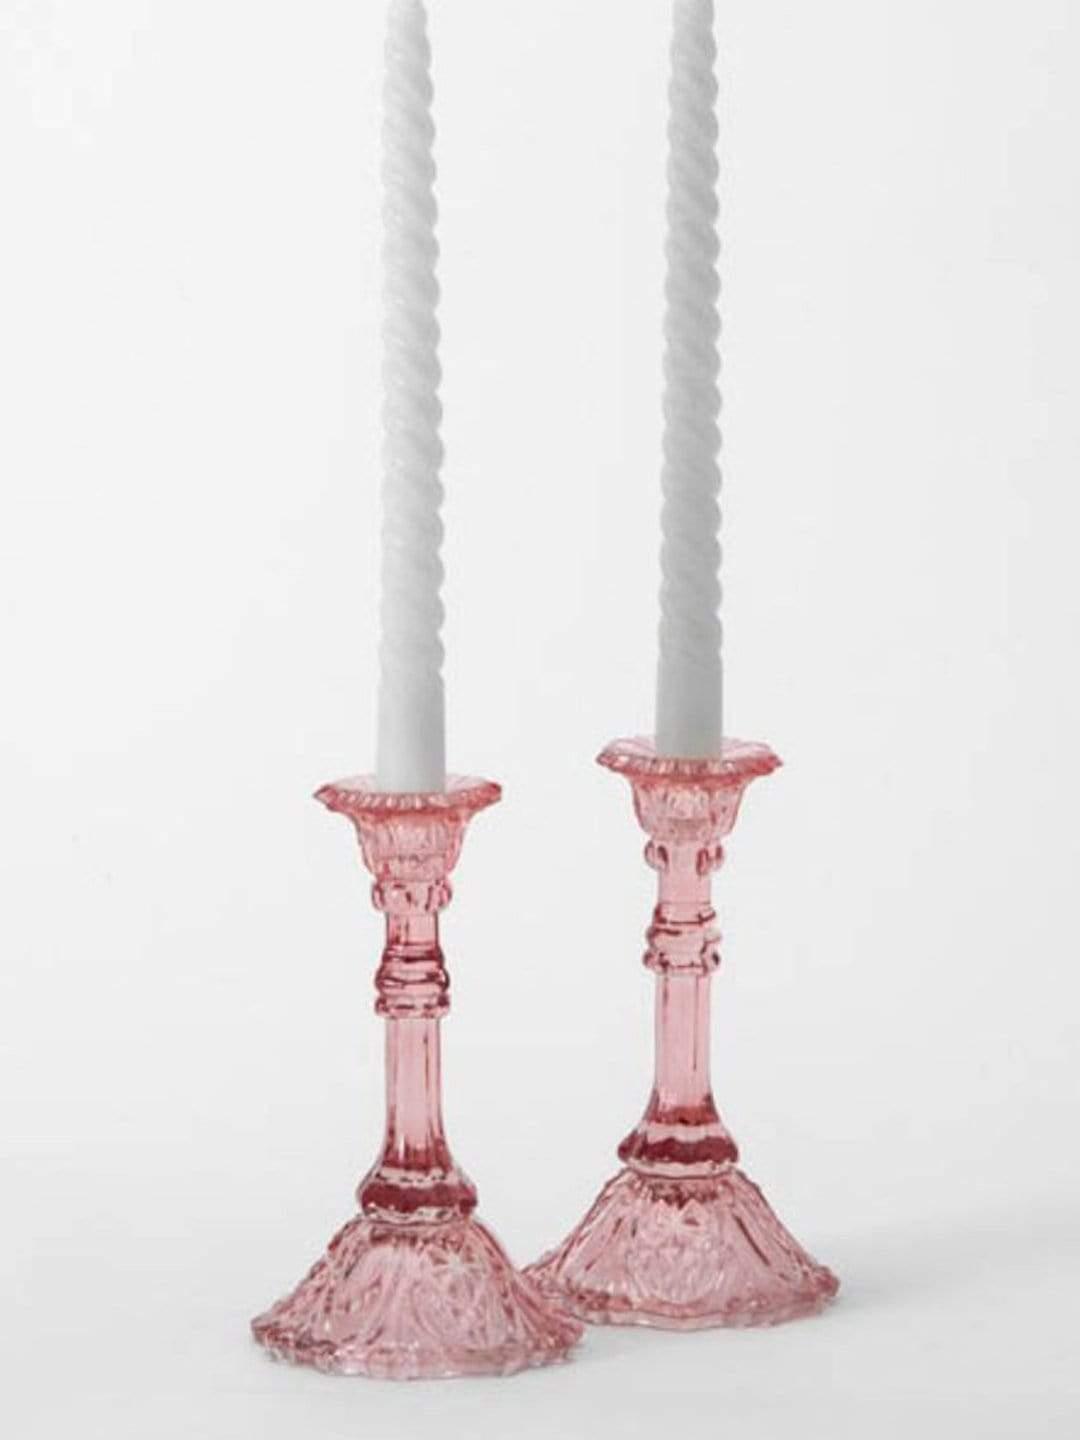 Vintage Recyled Glass Candle Holders - Tall - Set Of 2Material: Recycled Glass made using a pressure depression mould. An important quality of recycled glass is iron impurities which visually look like dark specks.
DimeVintage Recyled Glass Candle Holders - Tall - Set